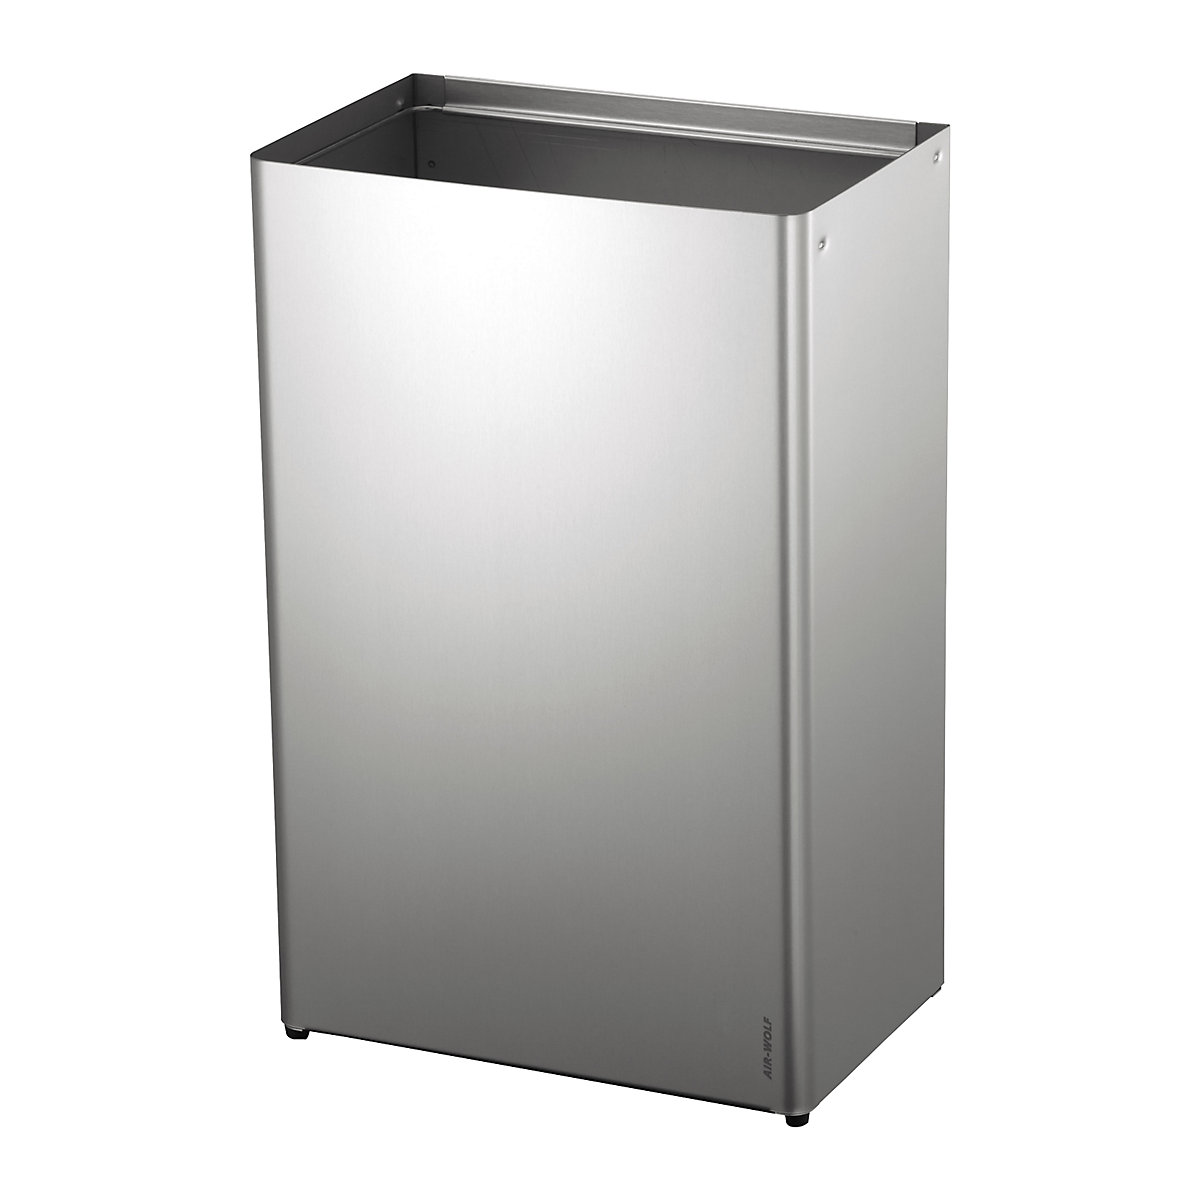 Waste collector – AIR-WOLF, capacity 60 l, WxHxD 389 x 612 x 250 mm, stainless steel, brushed-2